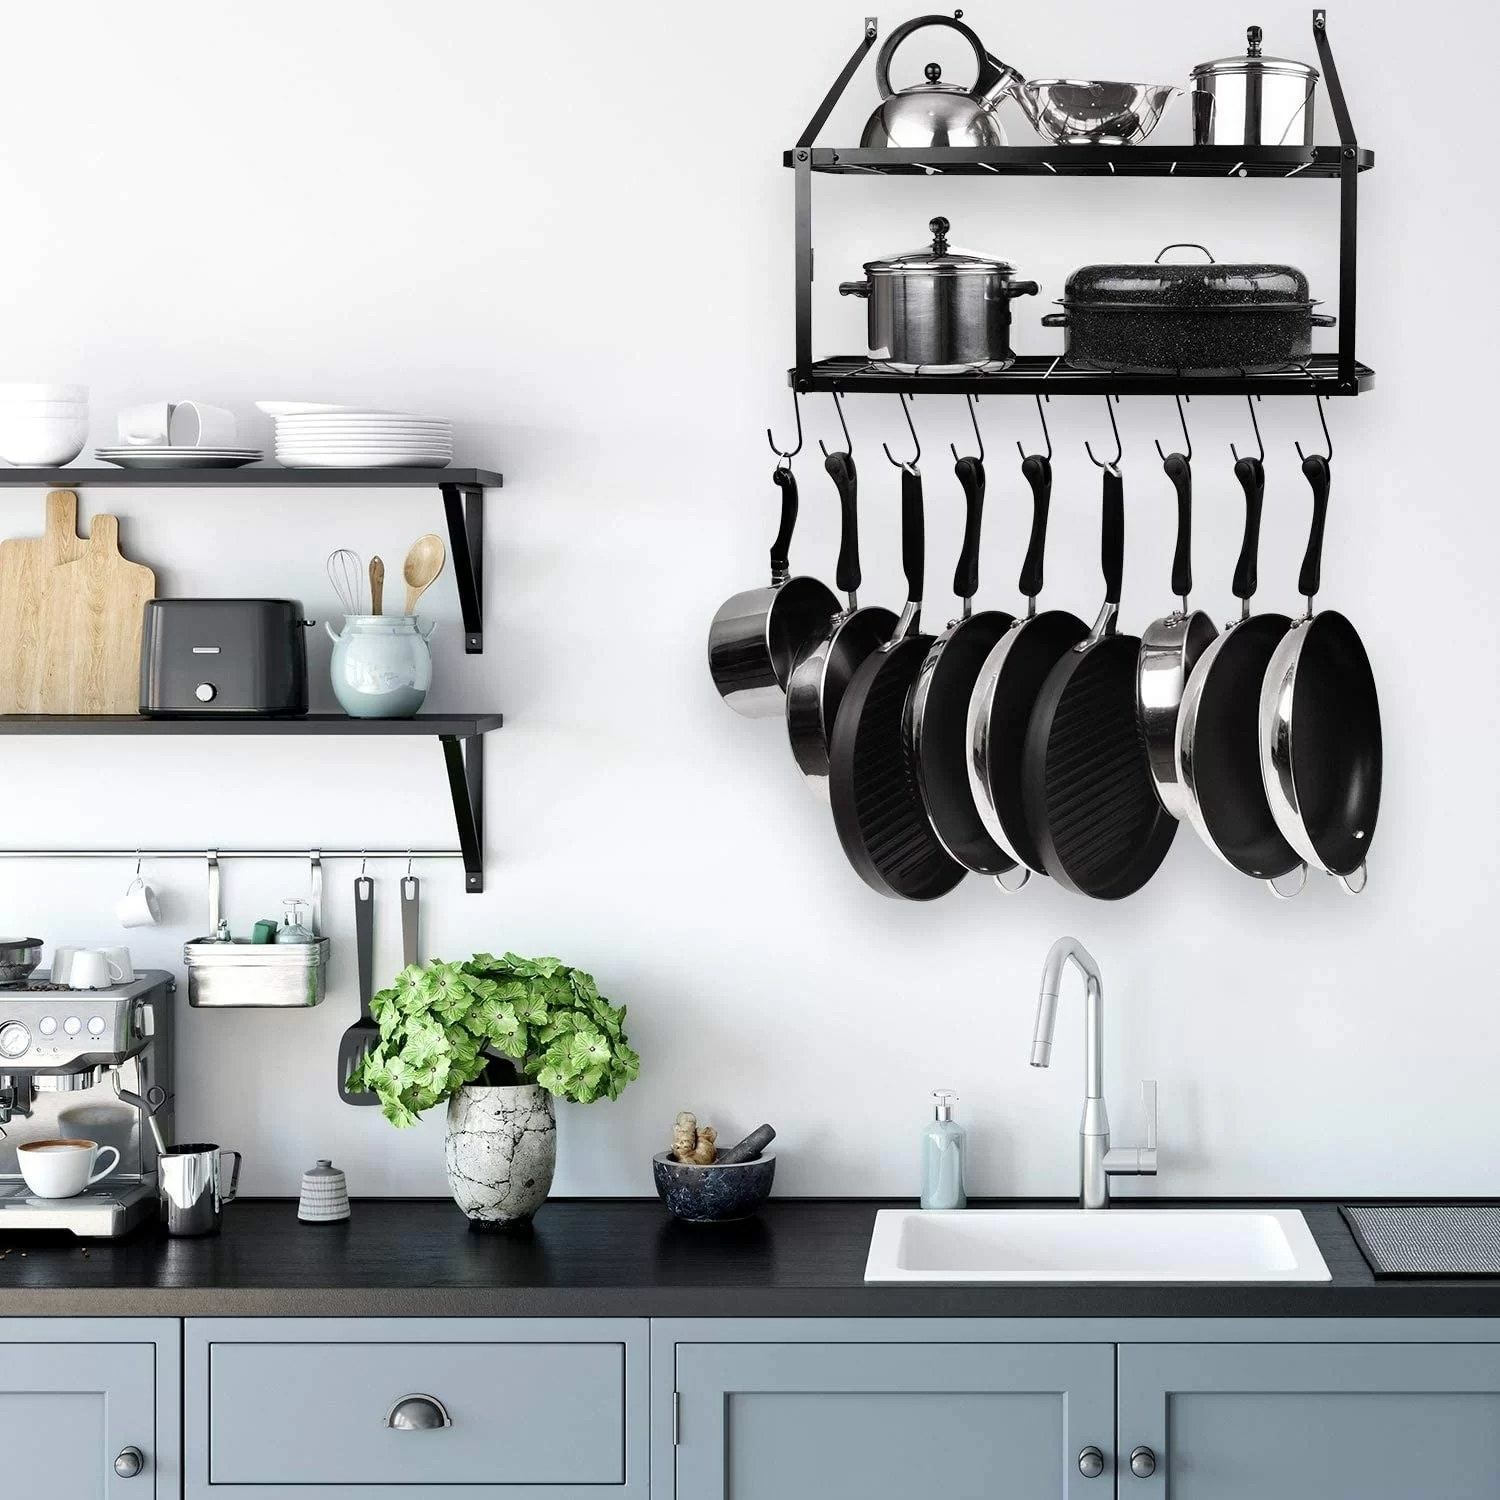 The wall-mounted pot rack hanging over a kitchen sink